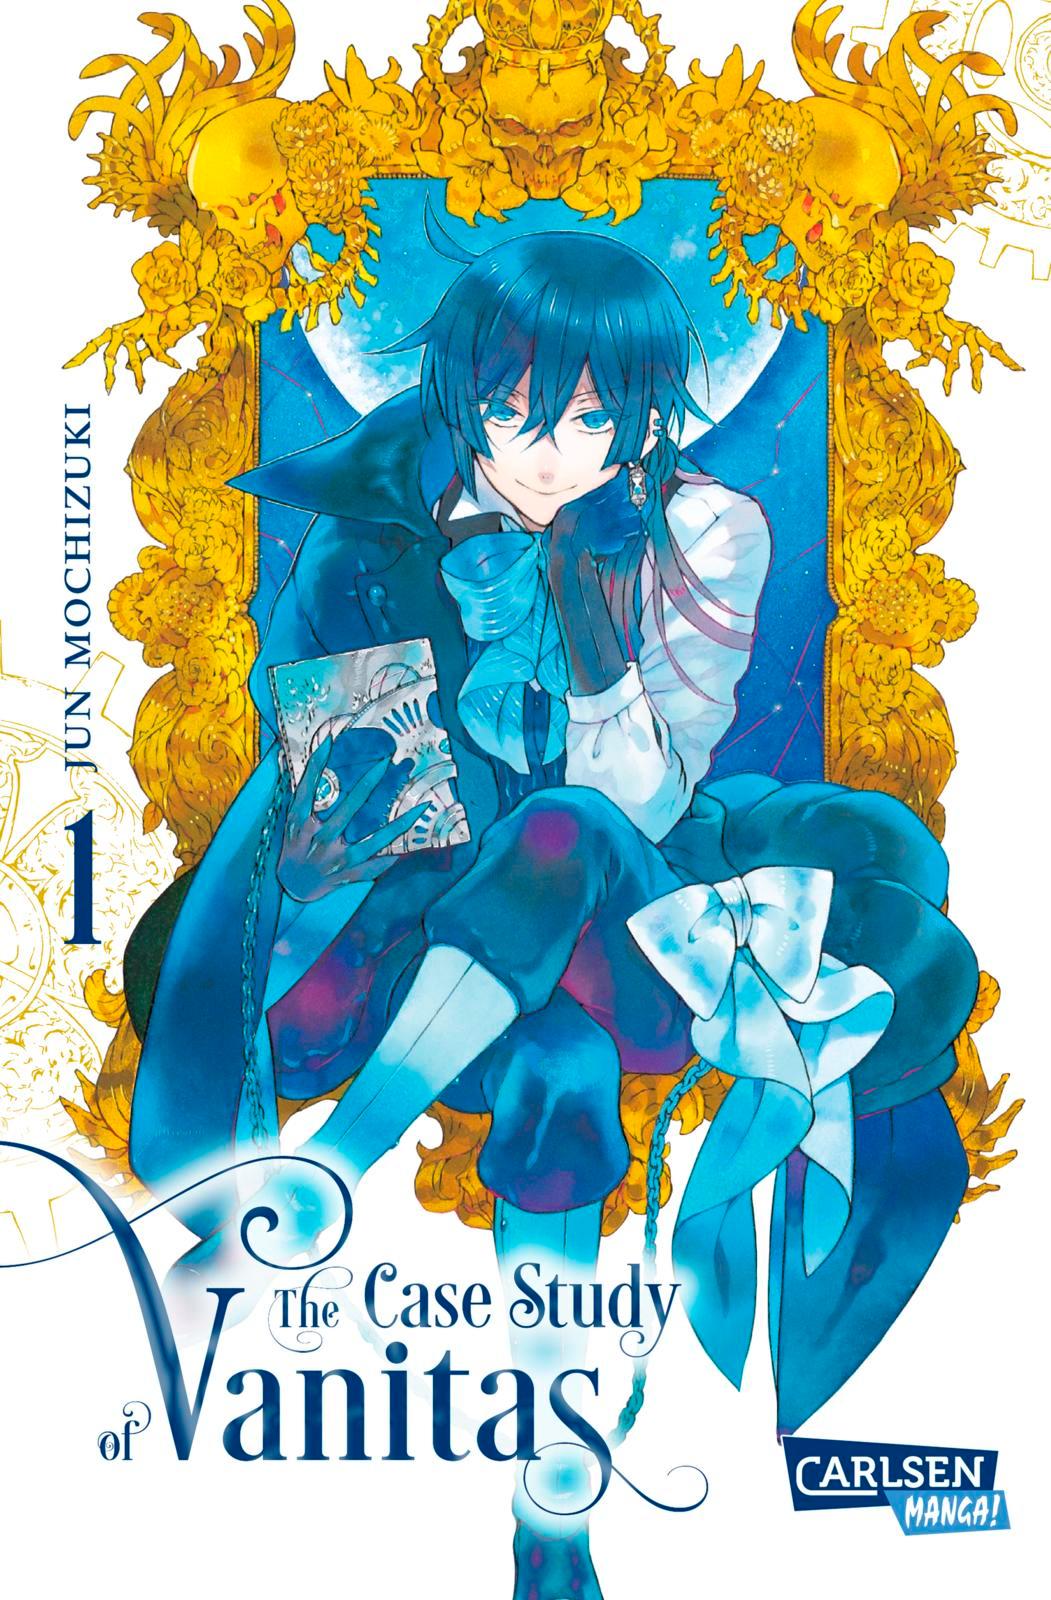 which the case study of vanitas character are you